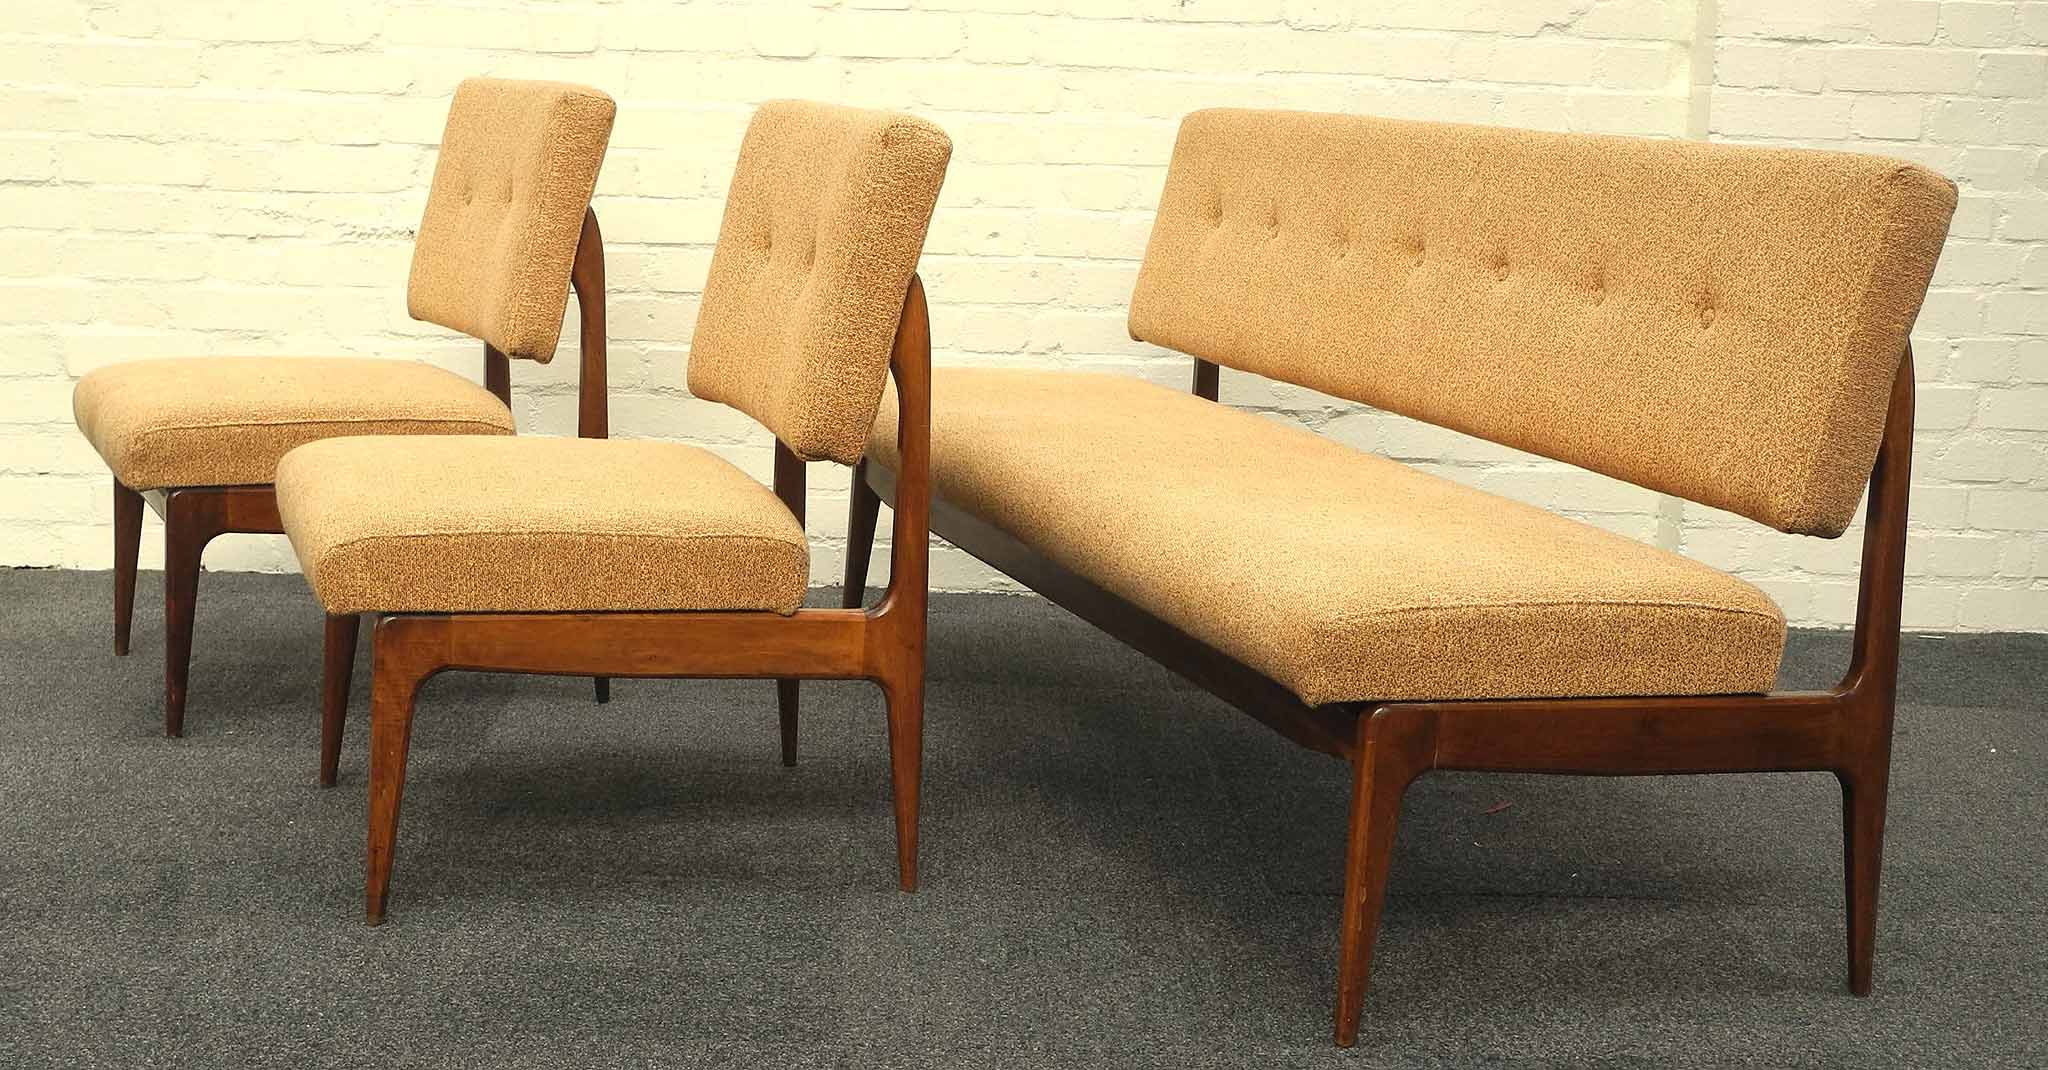 An Italian Anonomia Castelli sofa and two chairs, circa 1950, with bench style seat and back rest on